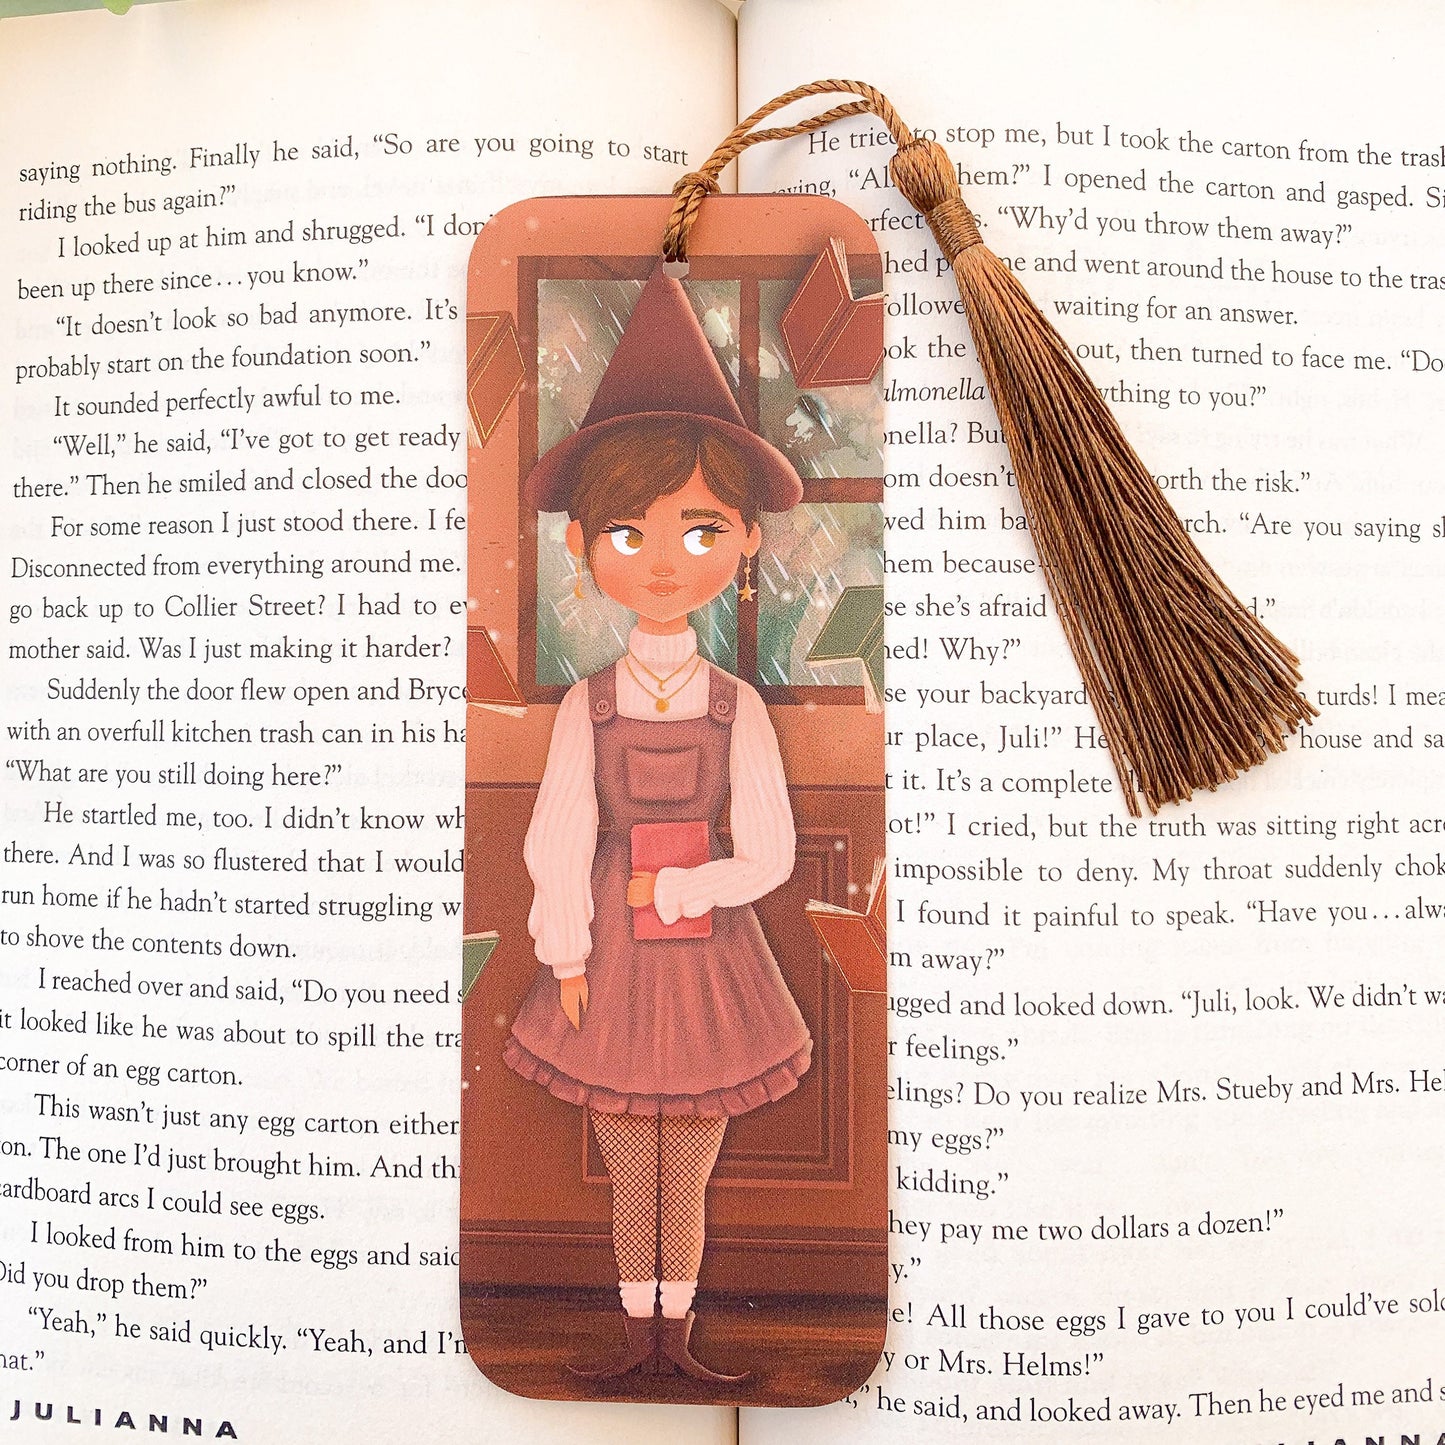 Book Witch Bookmark